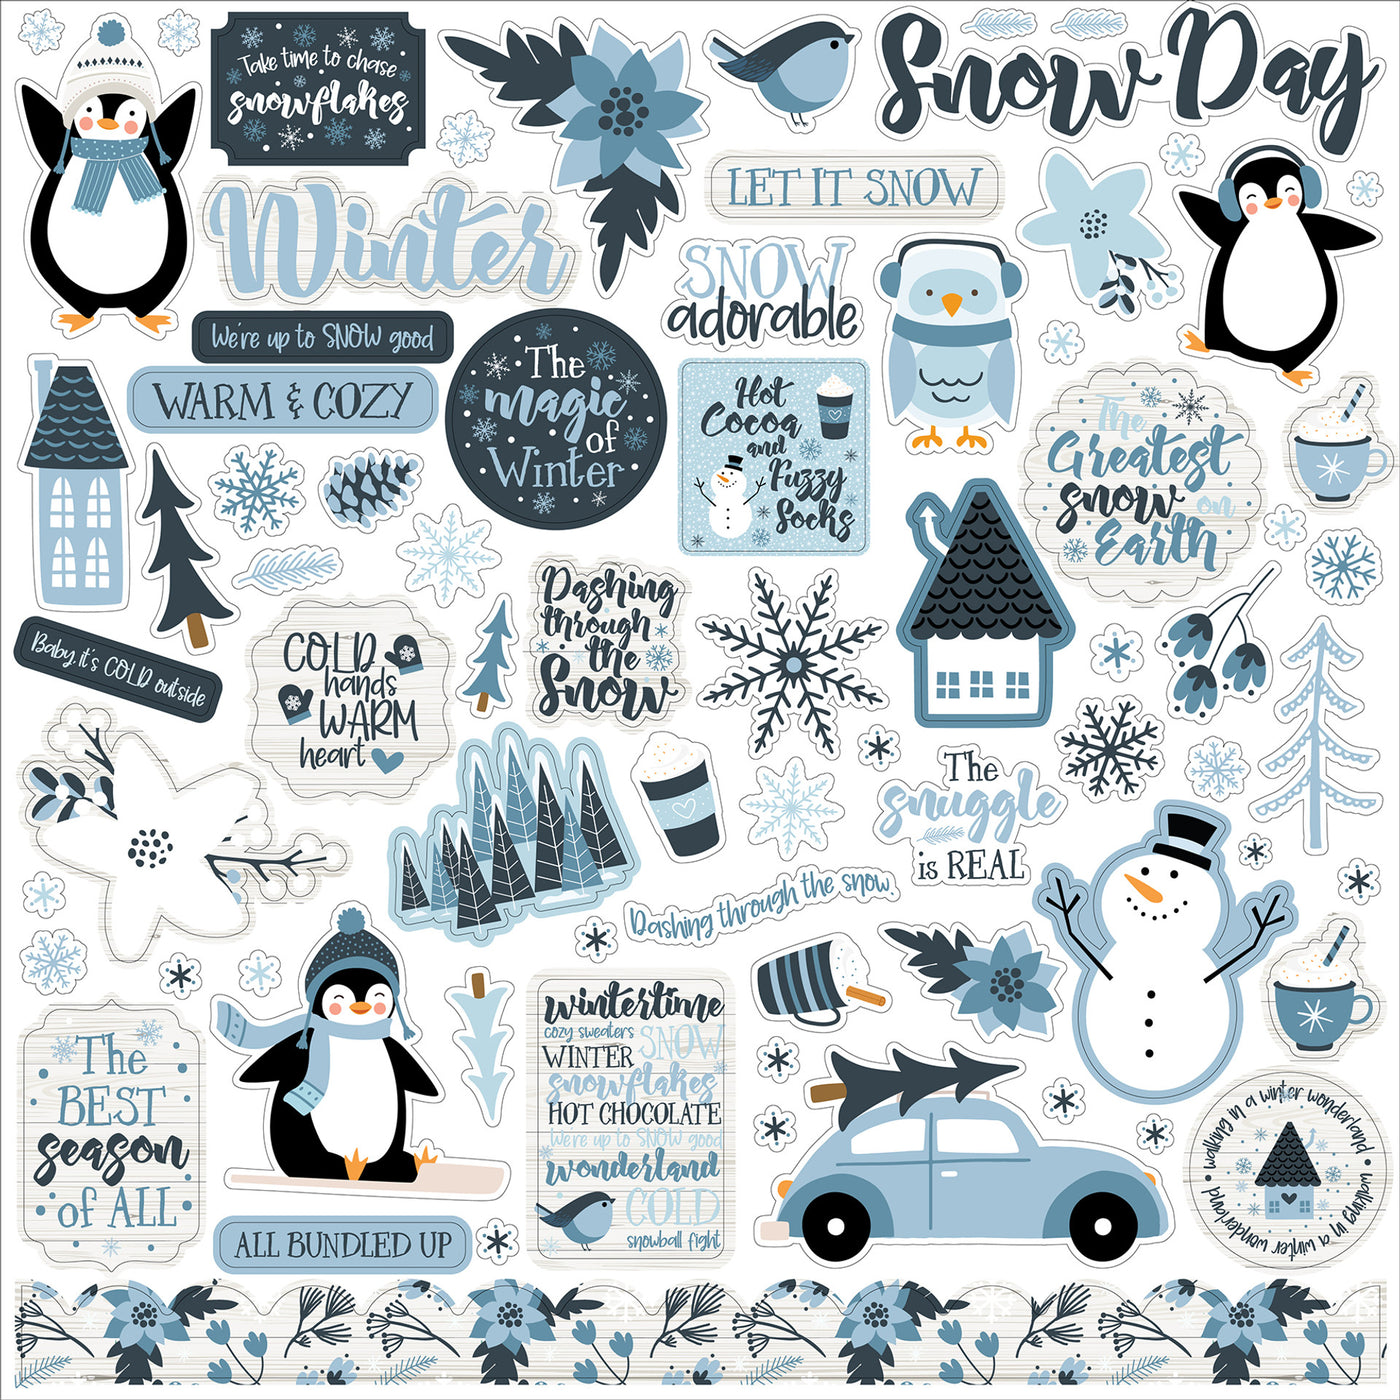 The Magic of Winter Elements 12" x 12" Cardstock Stickers from the Magic of Winter Collection by Echo Park. These stickers include snowmen, penguins, snowflakes, cups of hot chocolate, phrases, banners, and more!